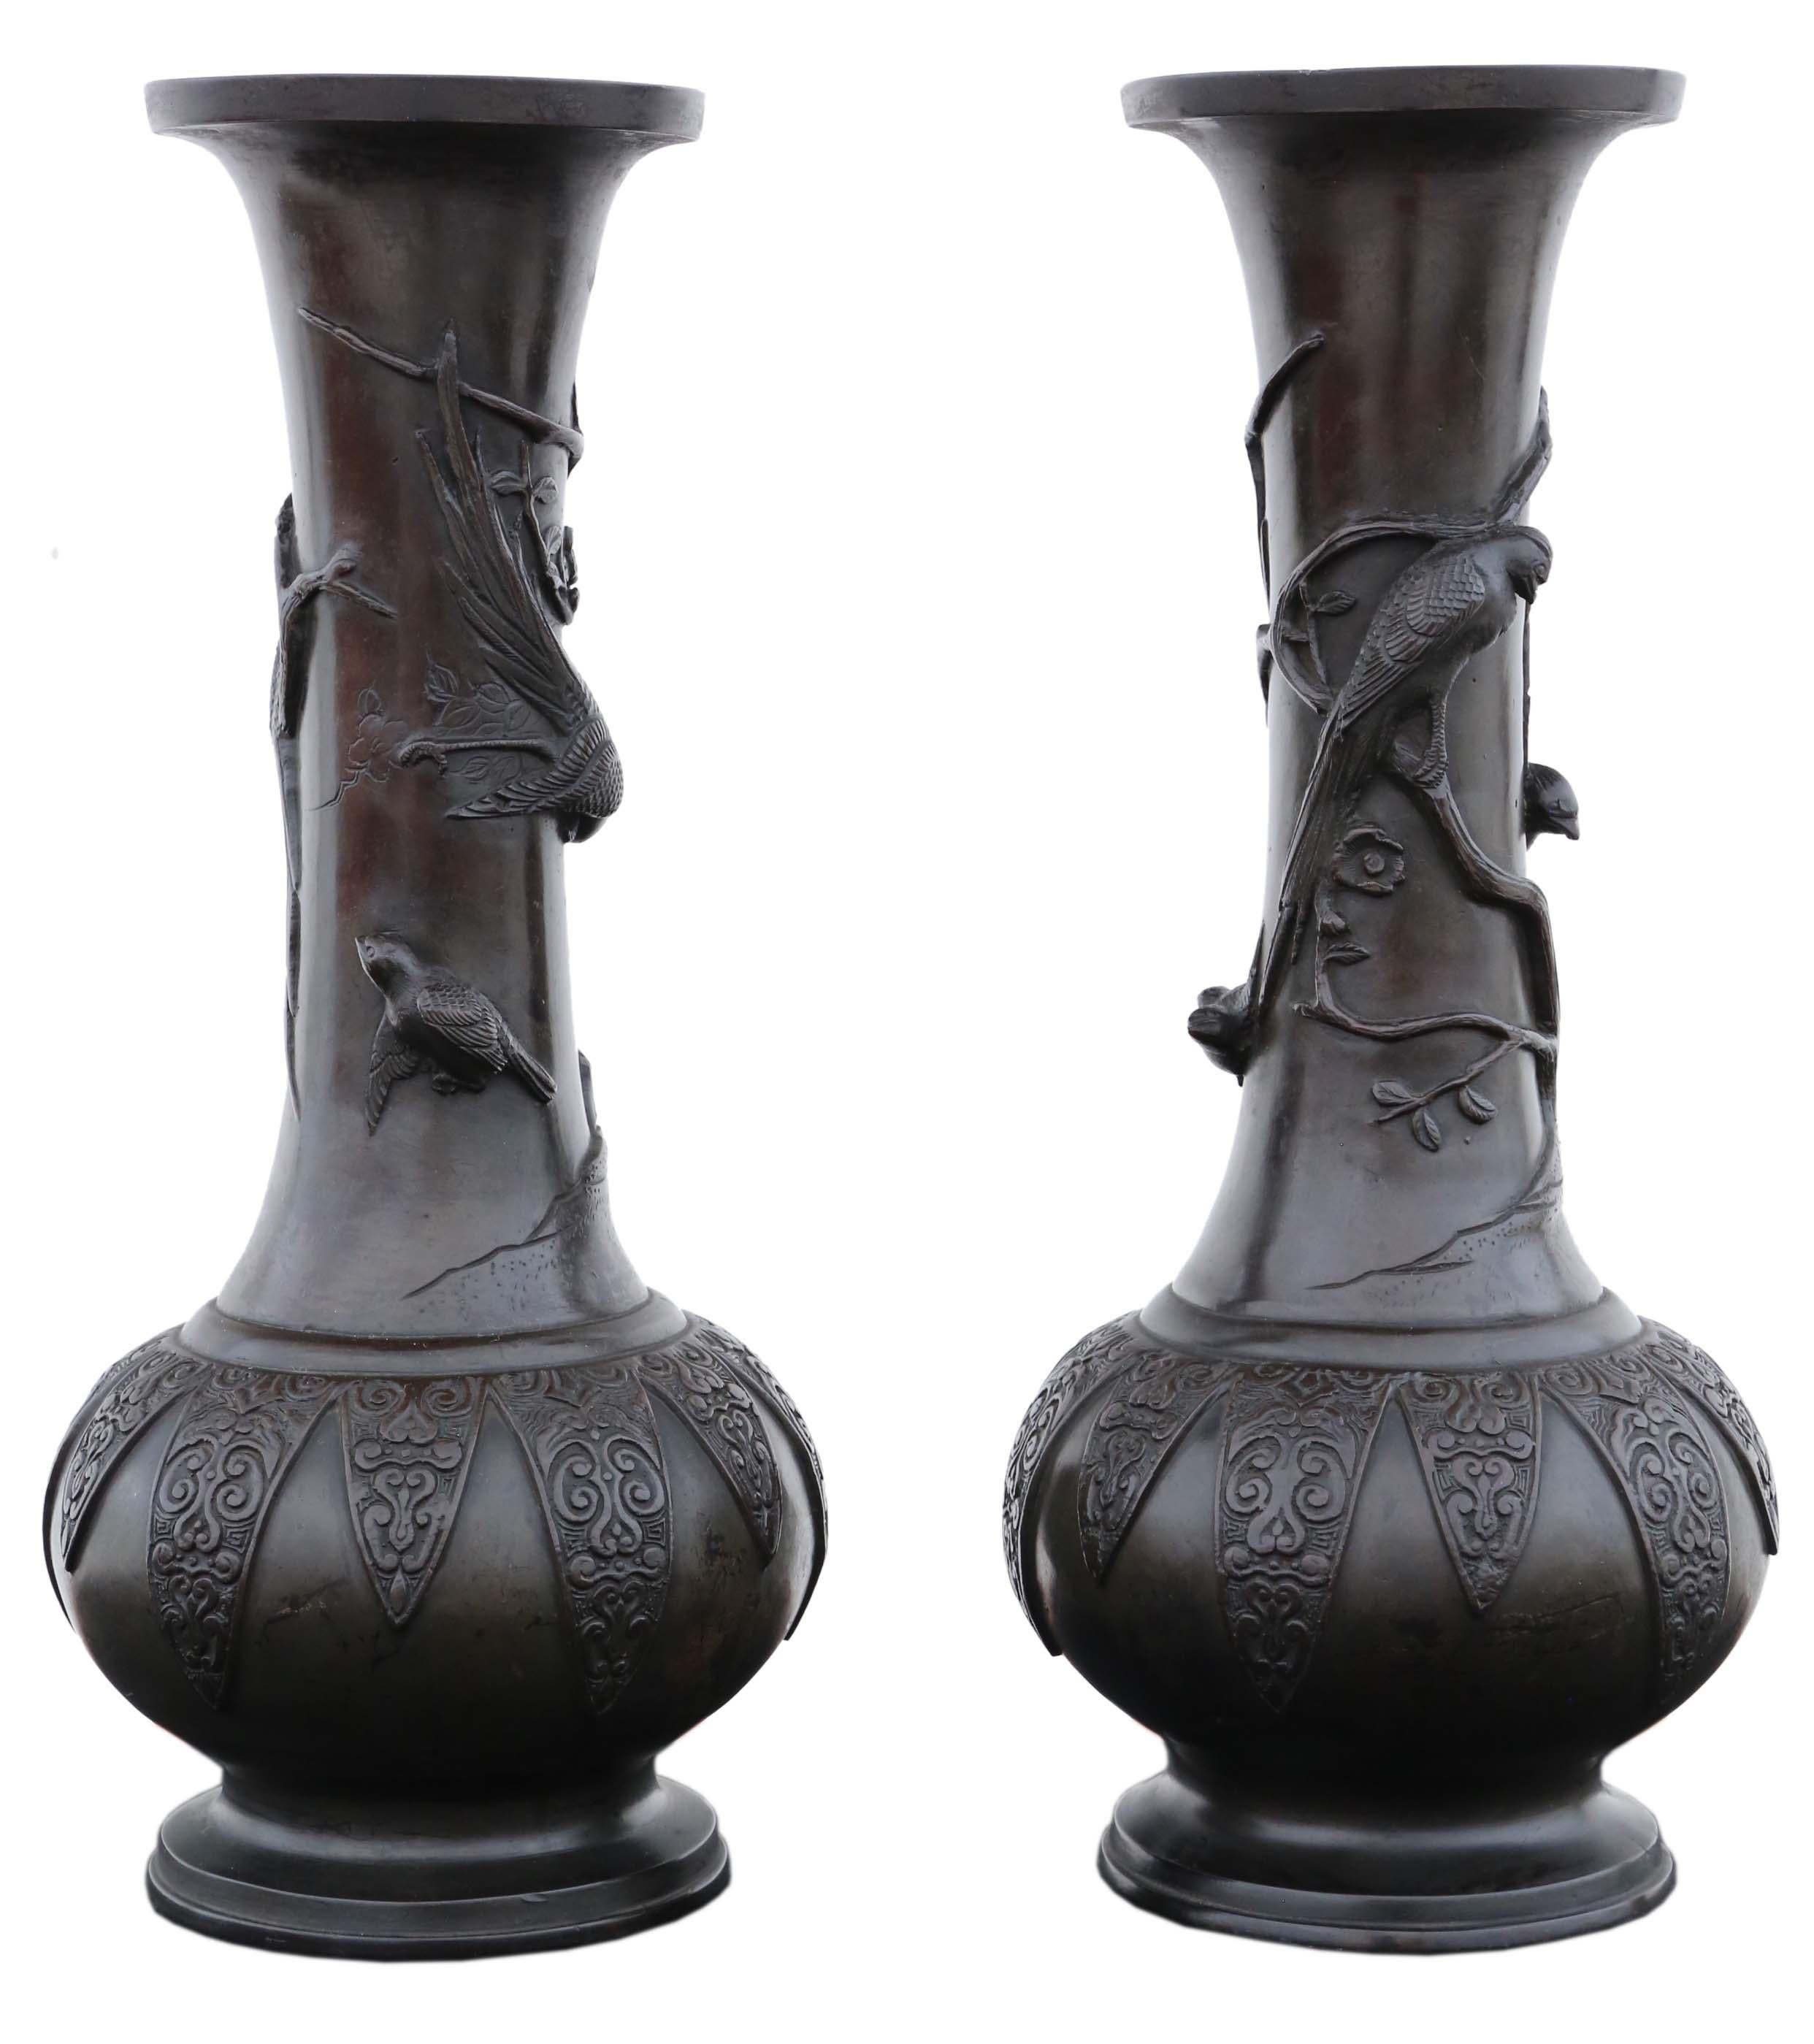 Antique Very Large Pair of Japanese Bronze Vases - 19th Century Meiji Period In Good Condition For Sale In Wisbech, Cambridgeshire